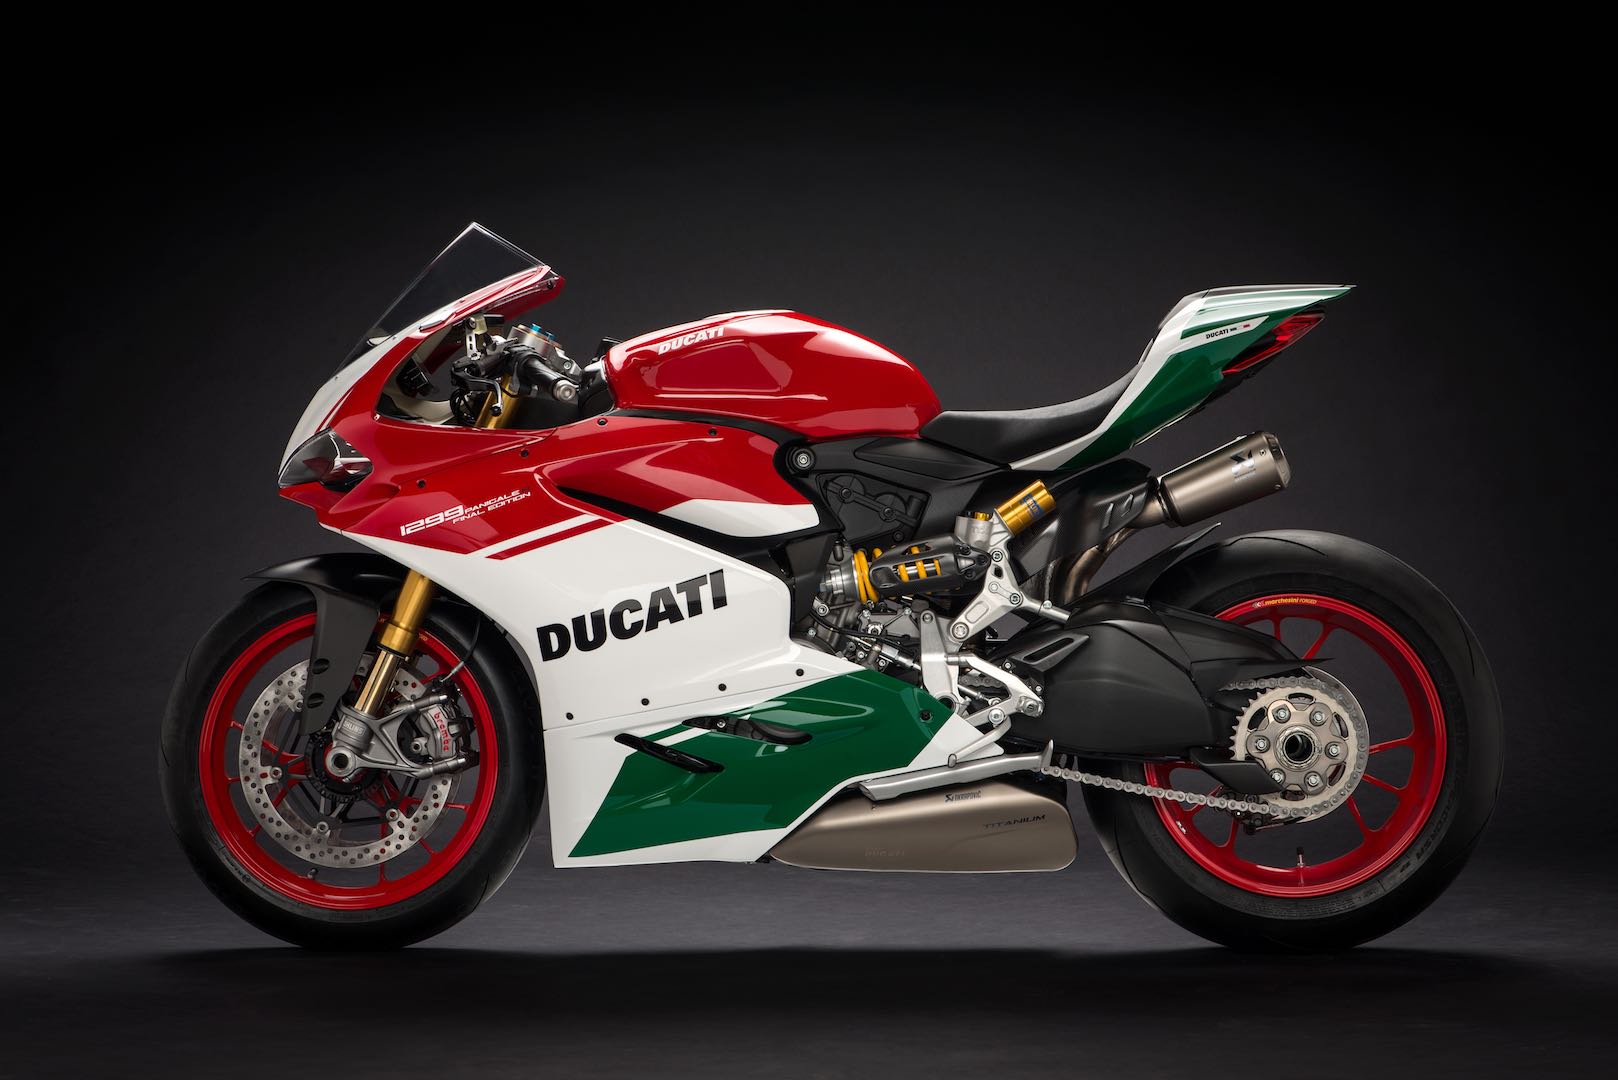 Duati panigale 1299 R final edition from side profile